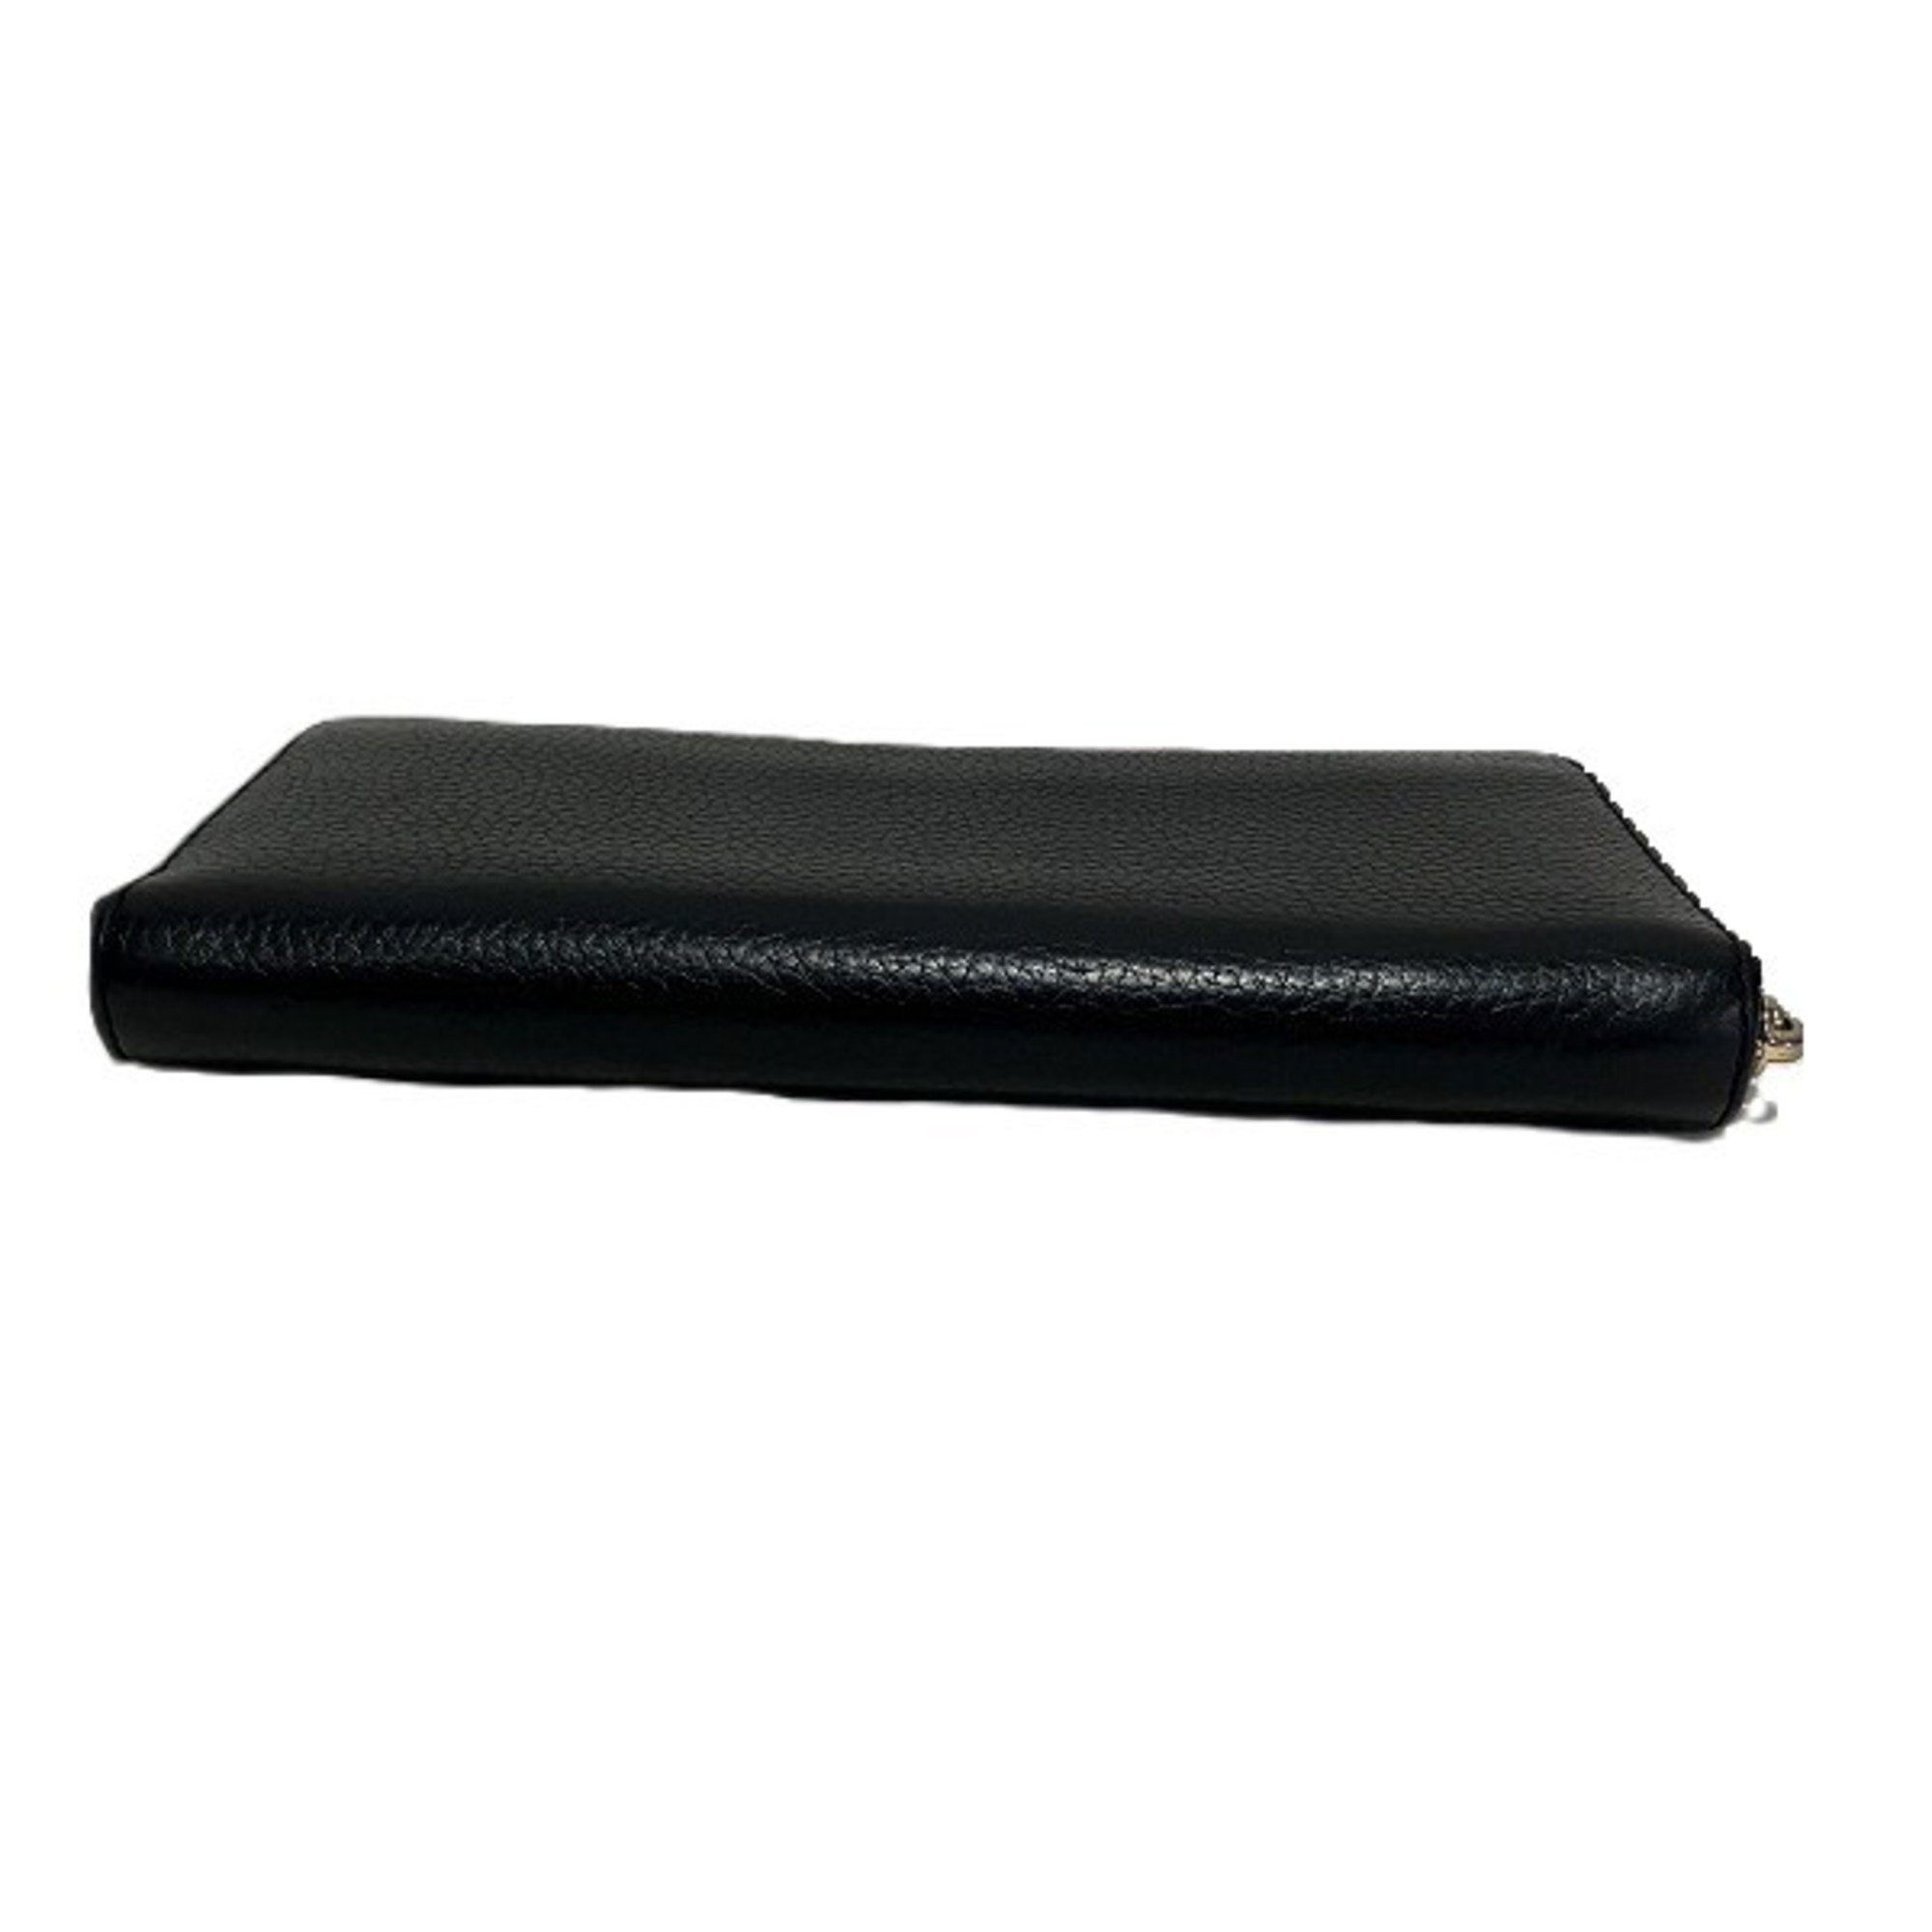 Michael Kors Round Black Leather Long Wallet for Women